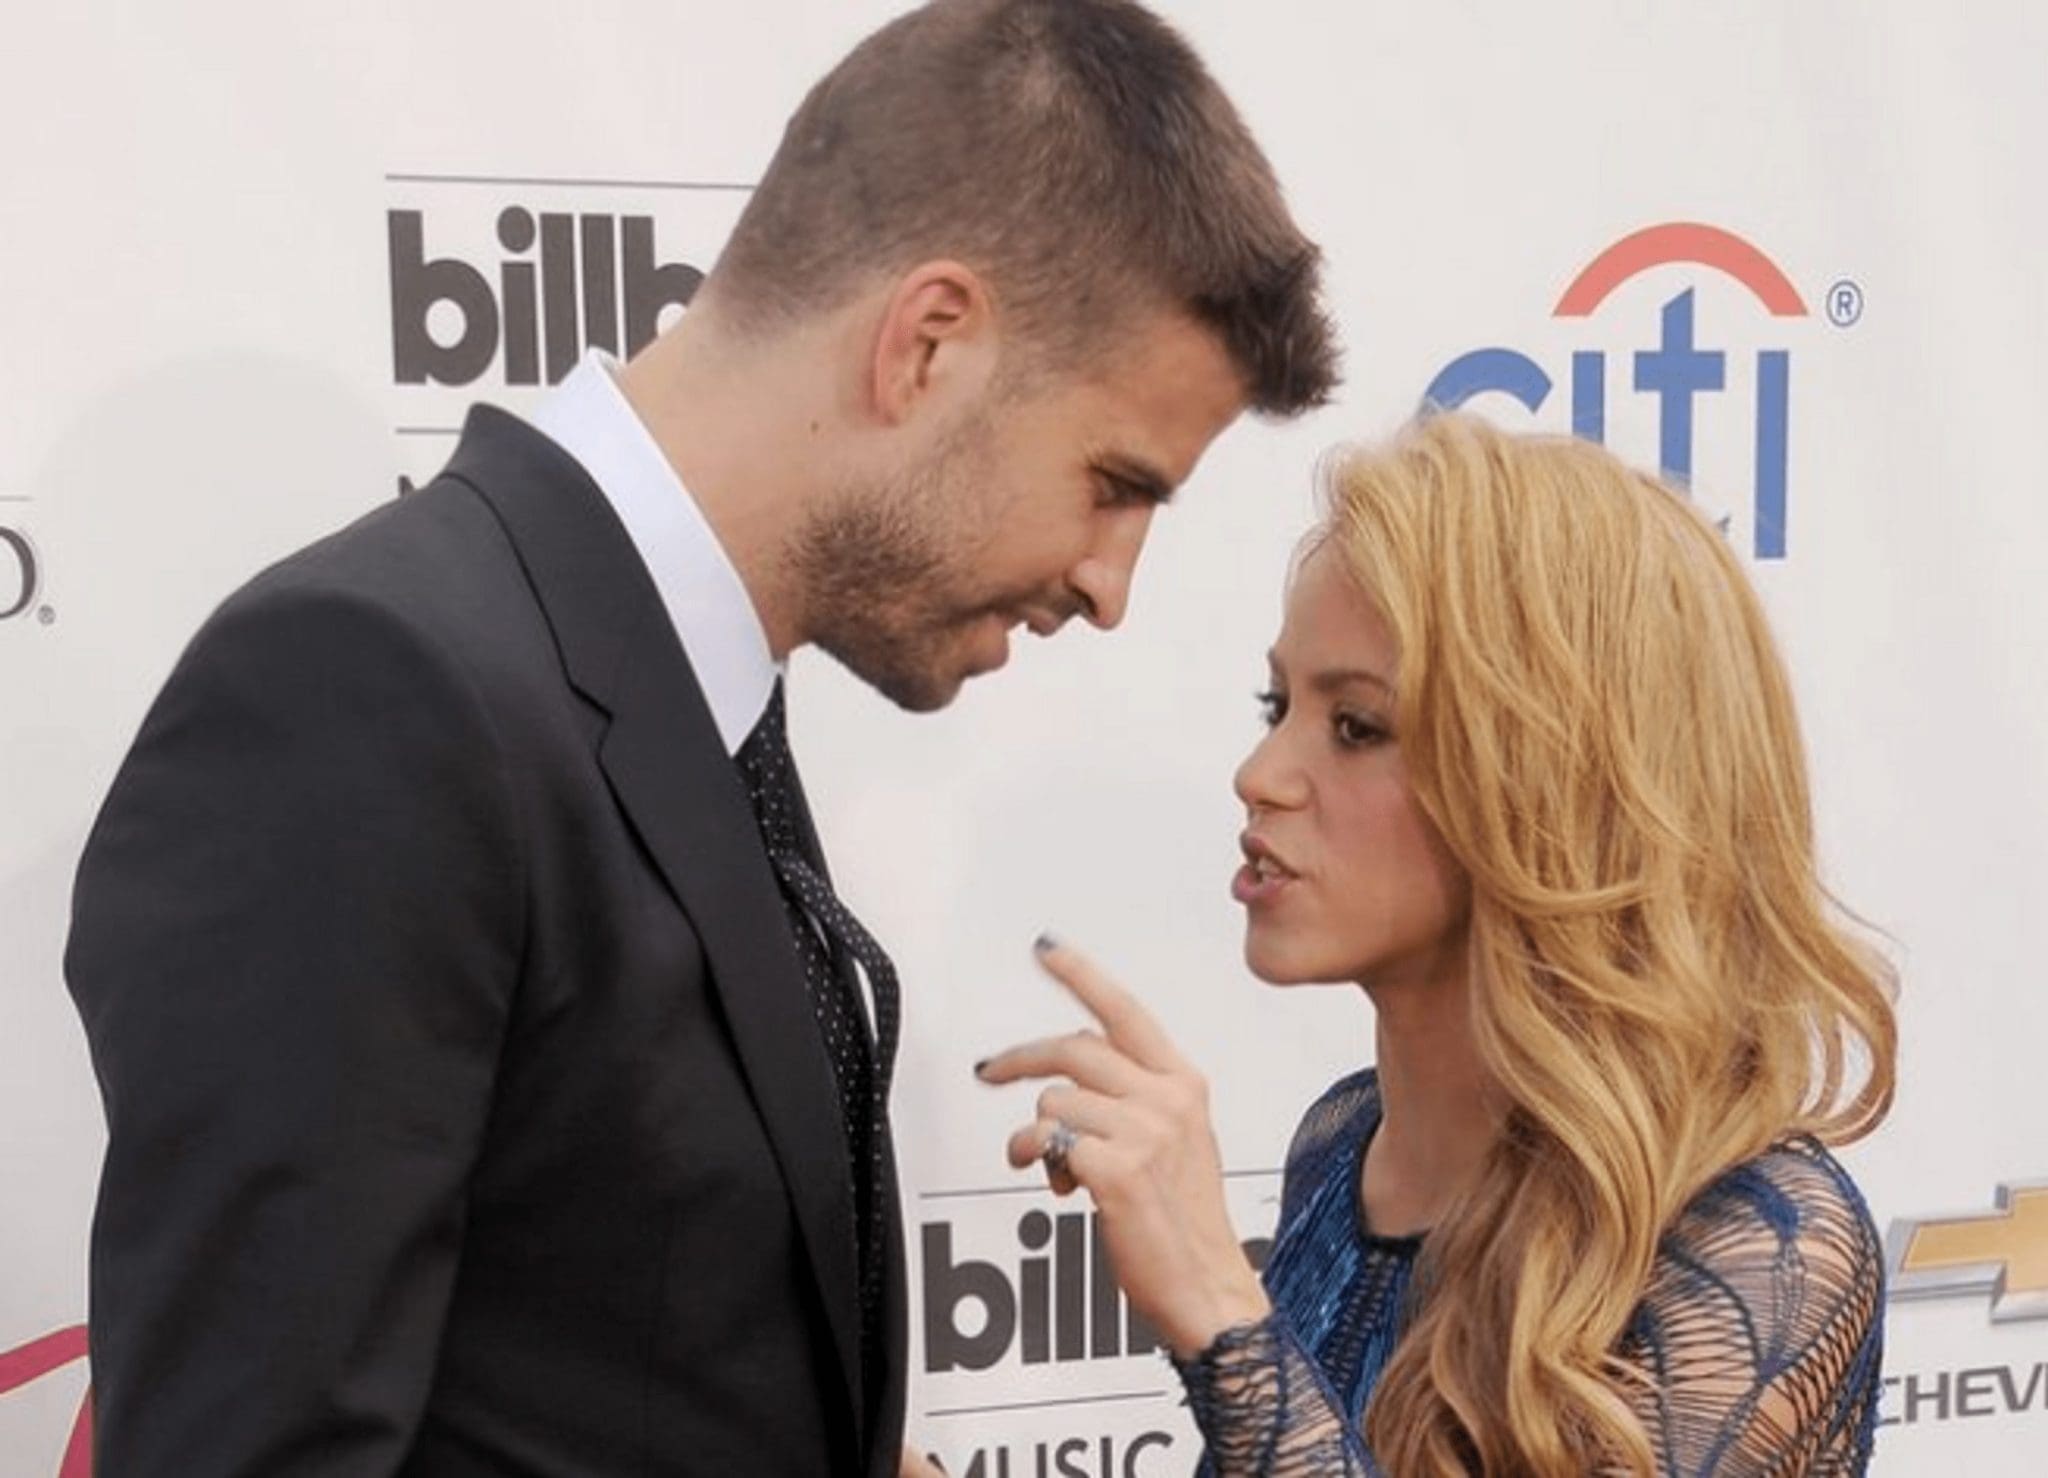 Gerard Pique Left His Mistress And Is Trying To Beg Forgiveness From Shakira